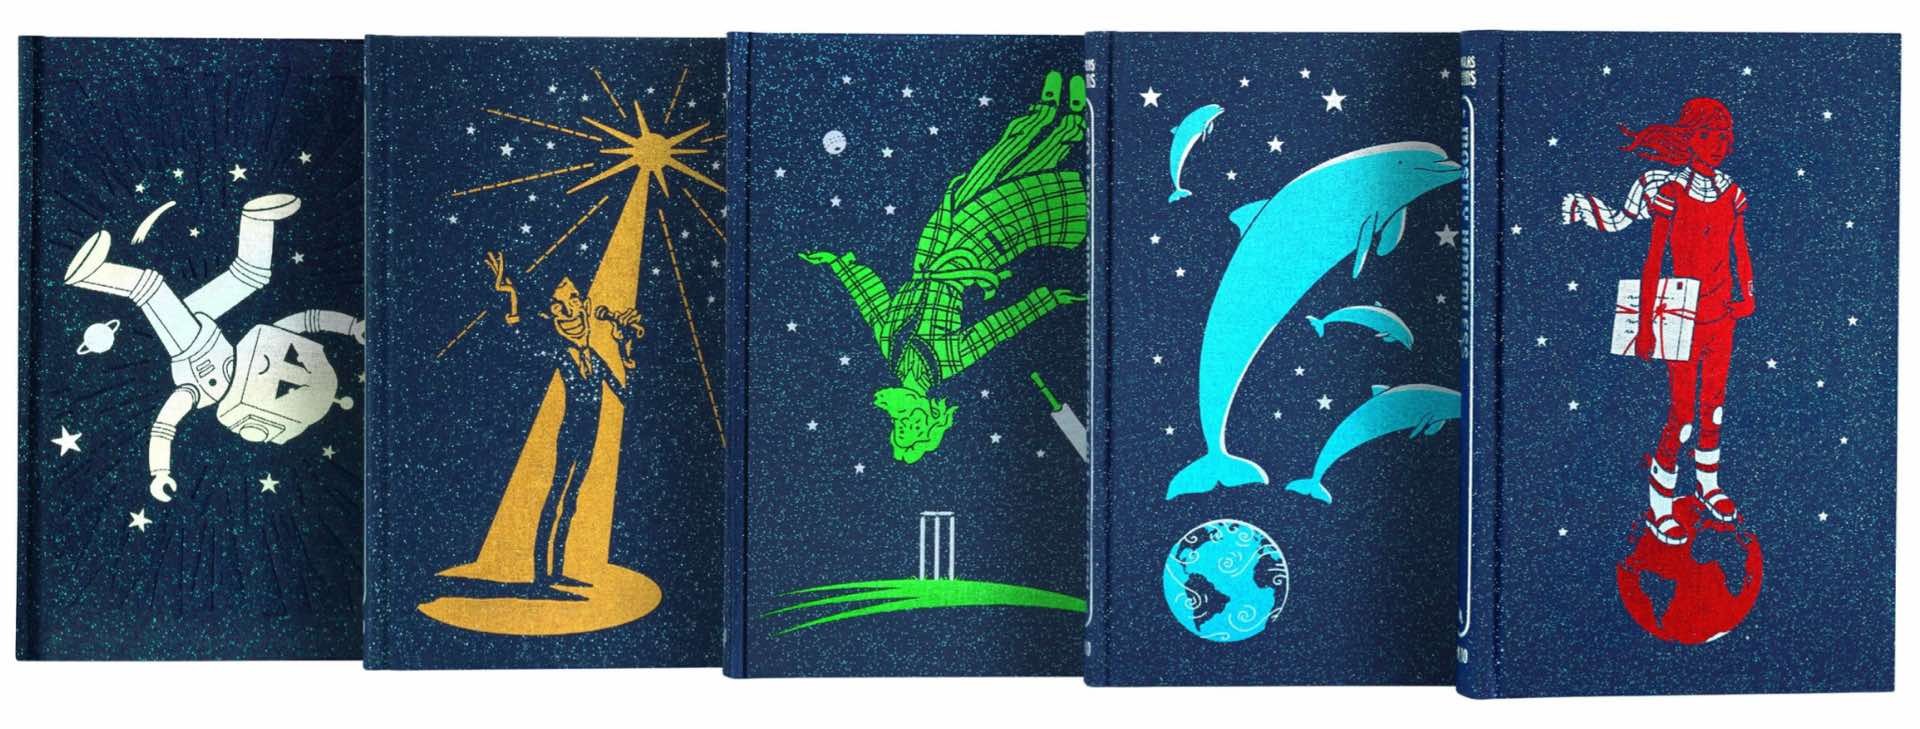 Douglas Adams' Complete Hitchhiker Series by The Folio Society. ($230 for 5-book series)